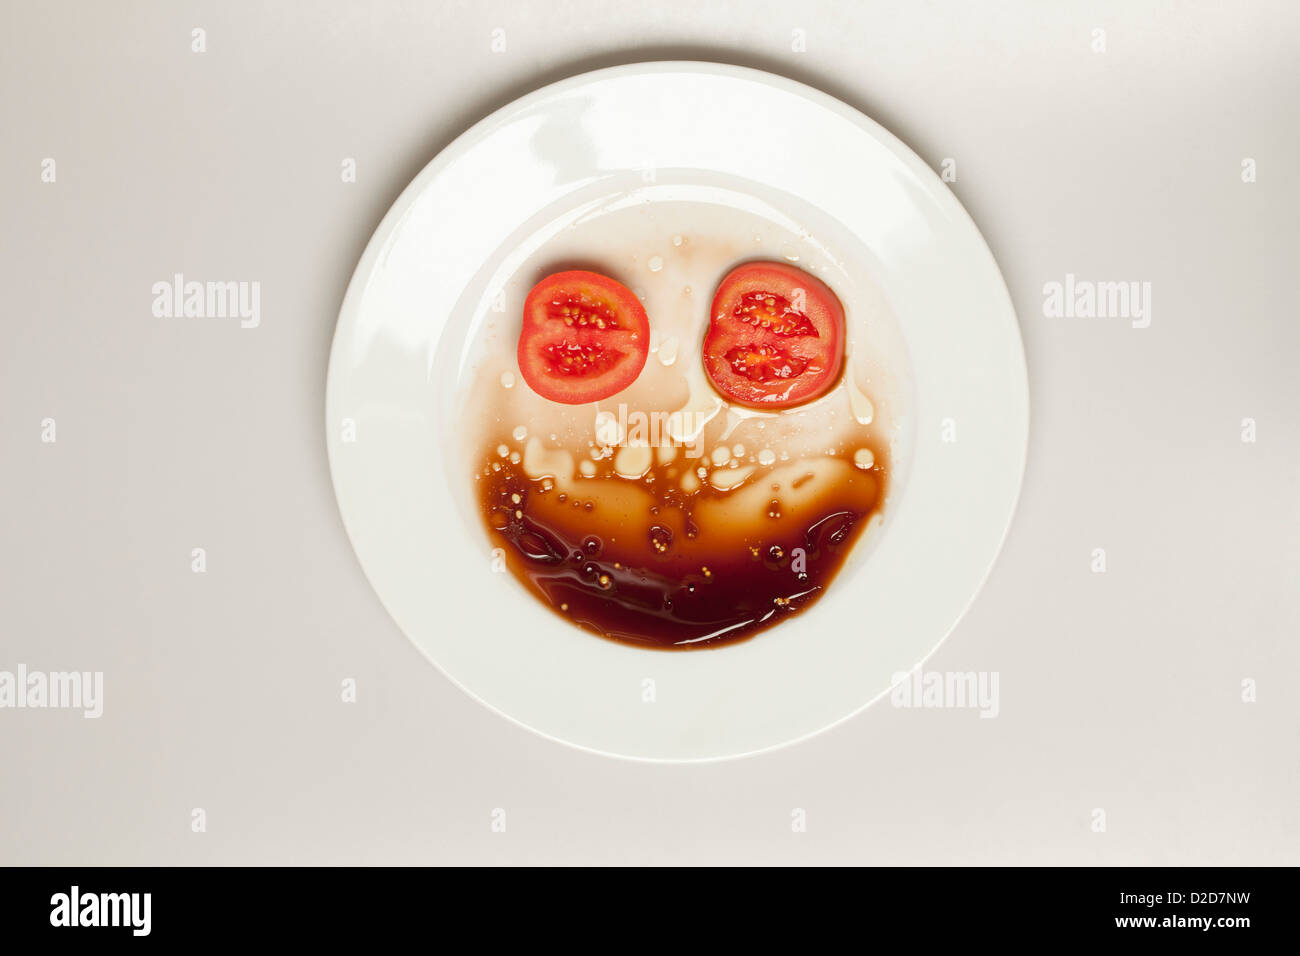 Abstract face made from tomato, plate and balsamic vinegar Stock Photo